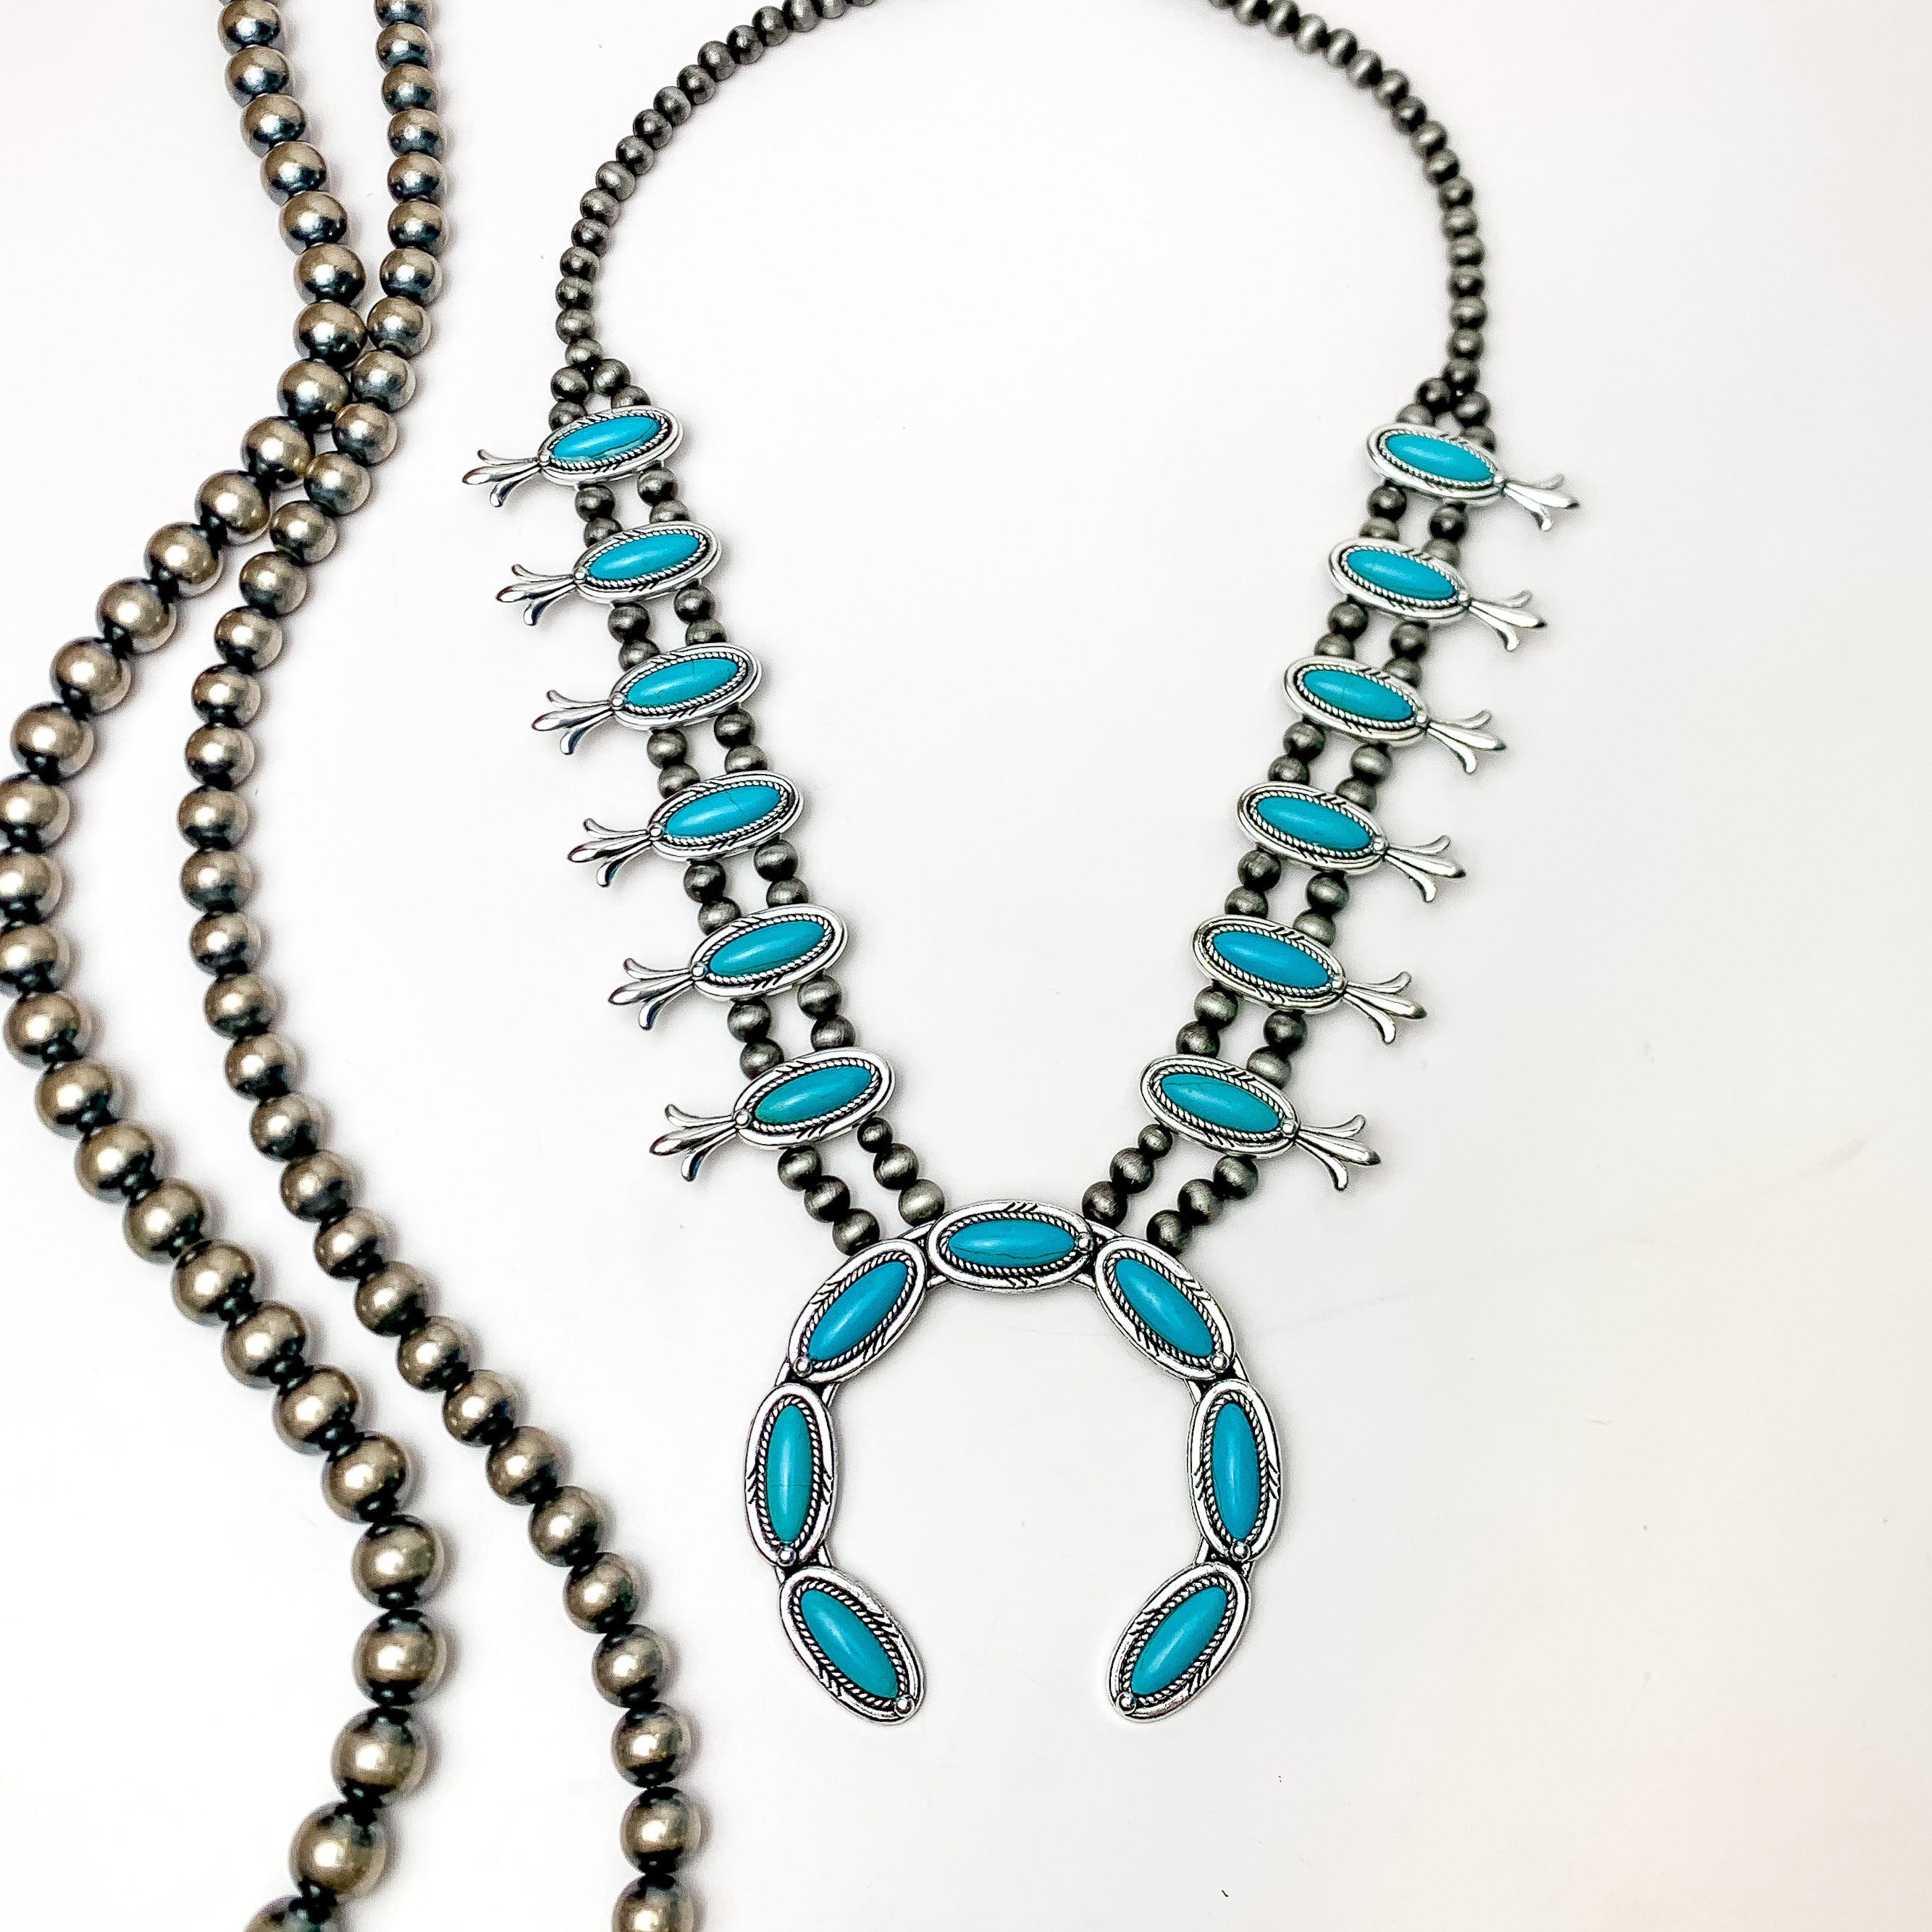 Silver Tone Pearl Squash Blossom Necklace in Turquoise. Pictured on a white background with Navajo beads on the left.